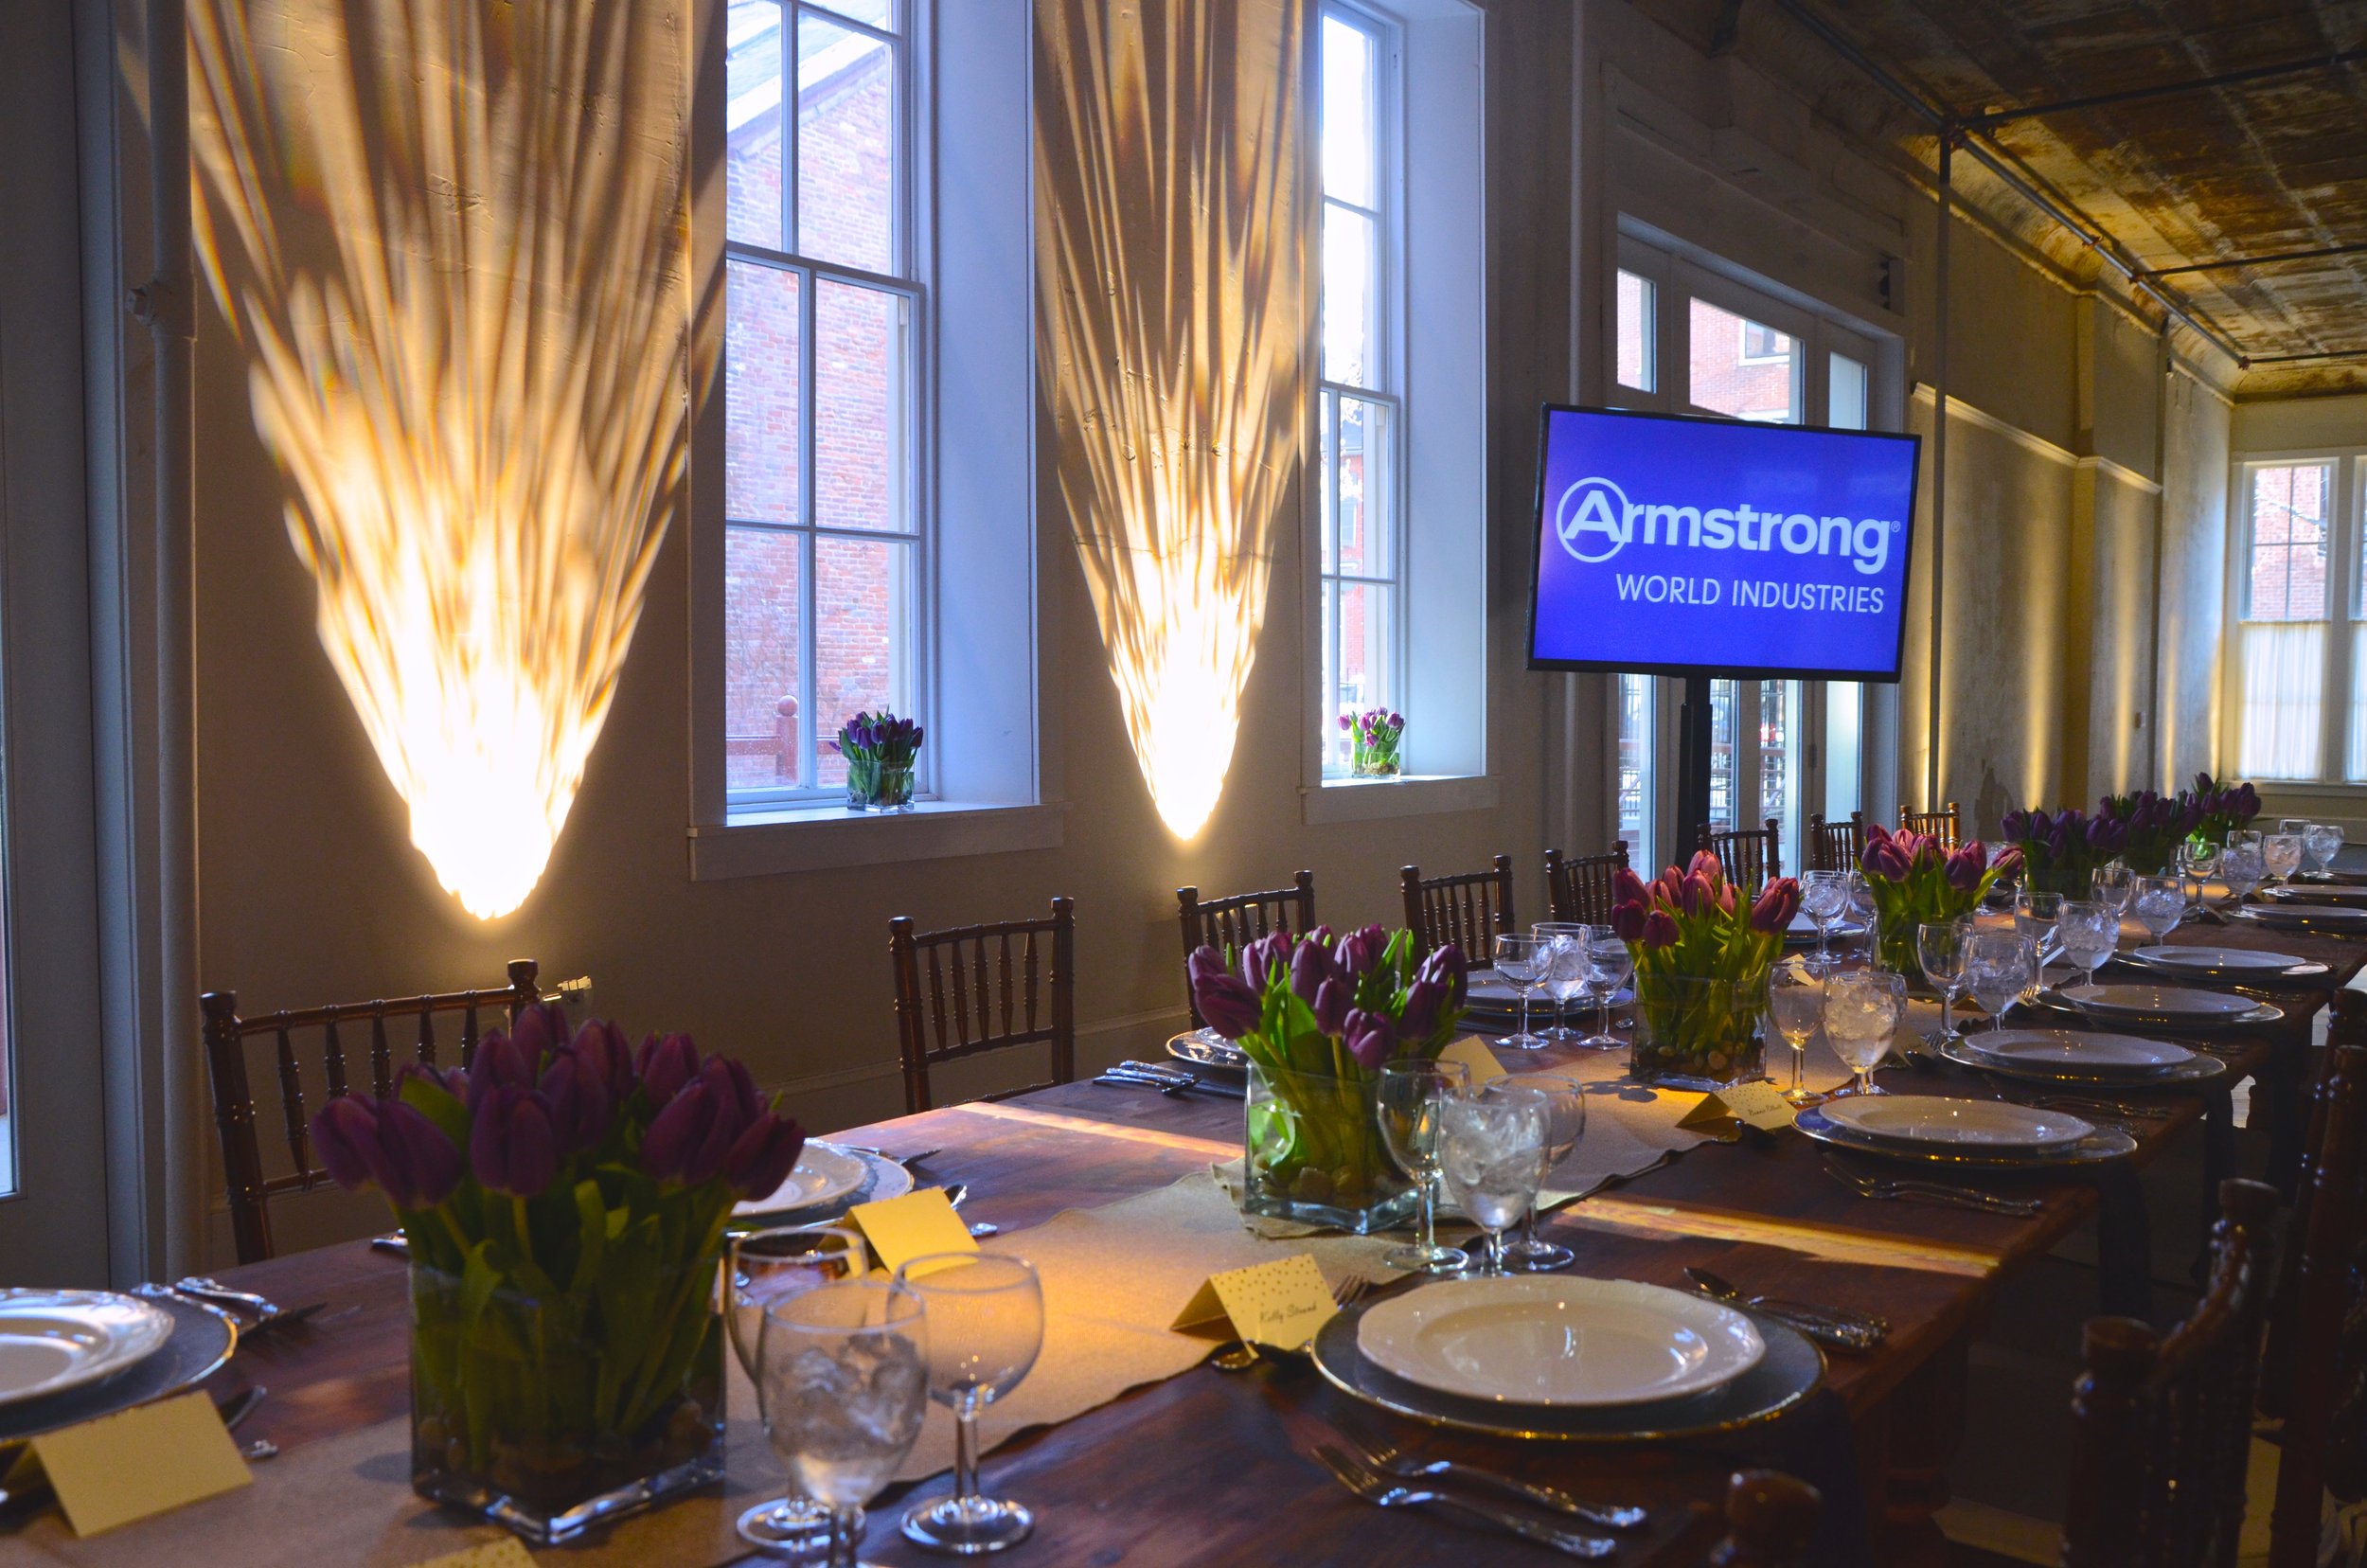 Armstrong corporate event dinner table reception